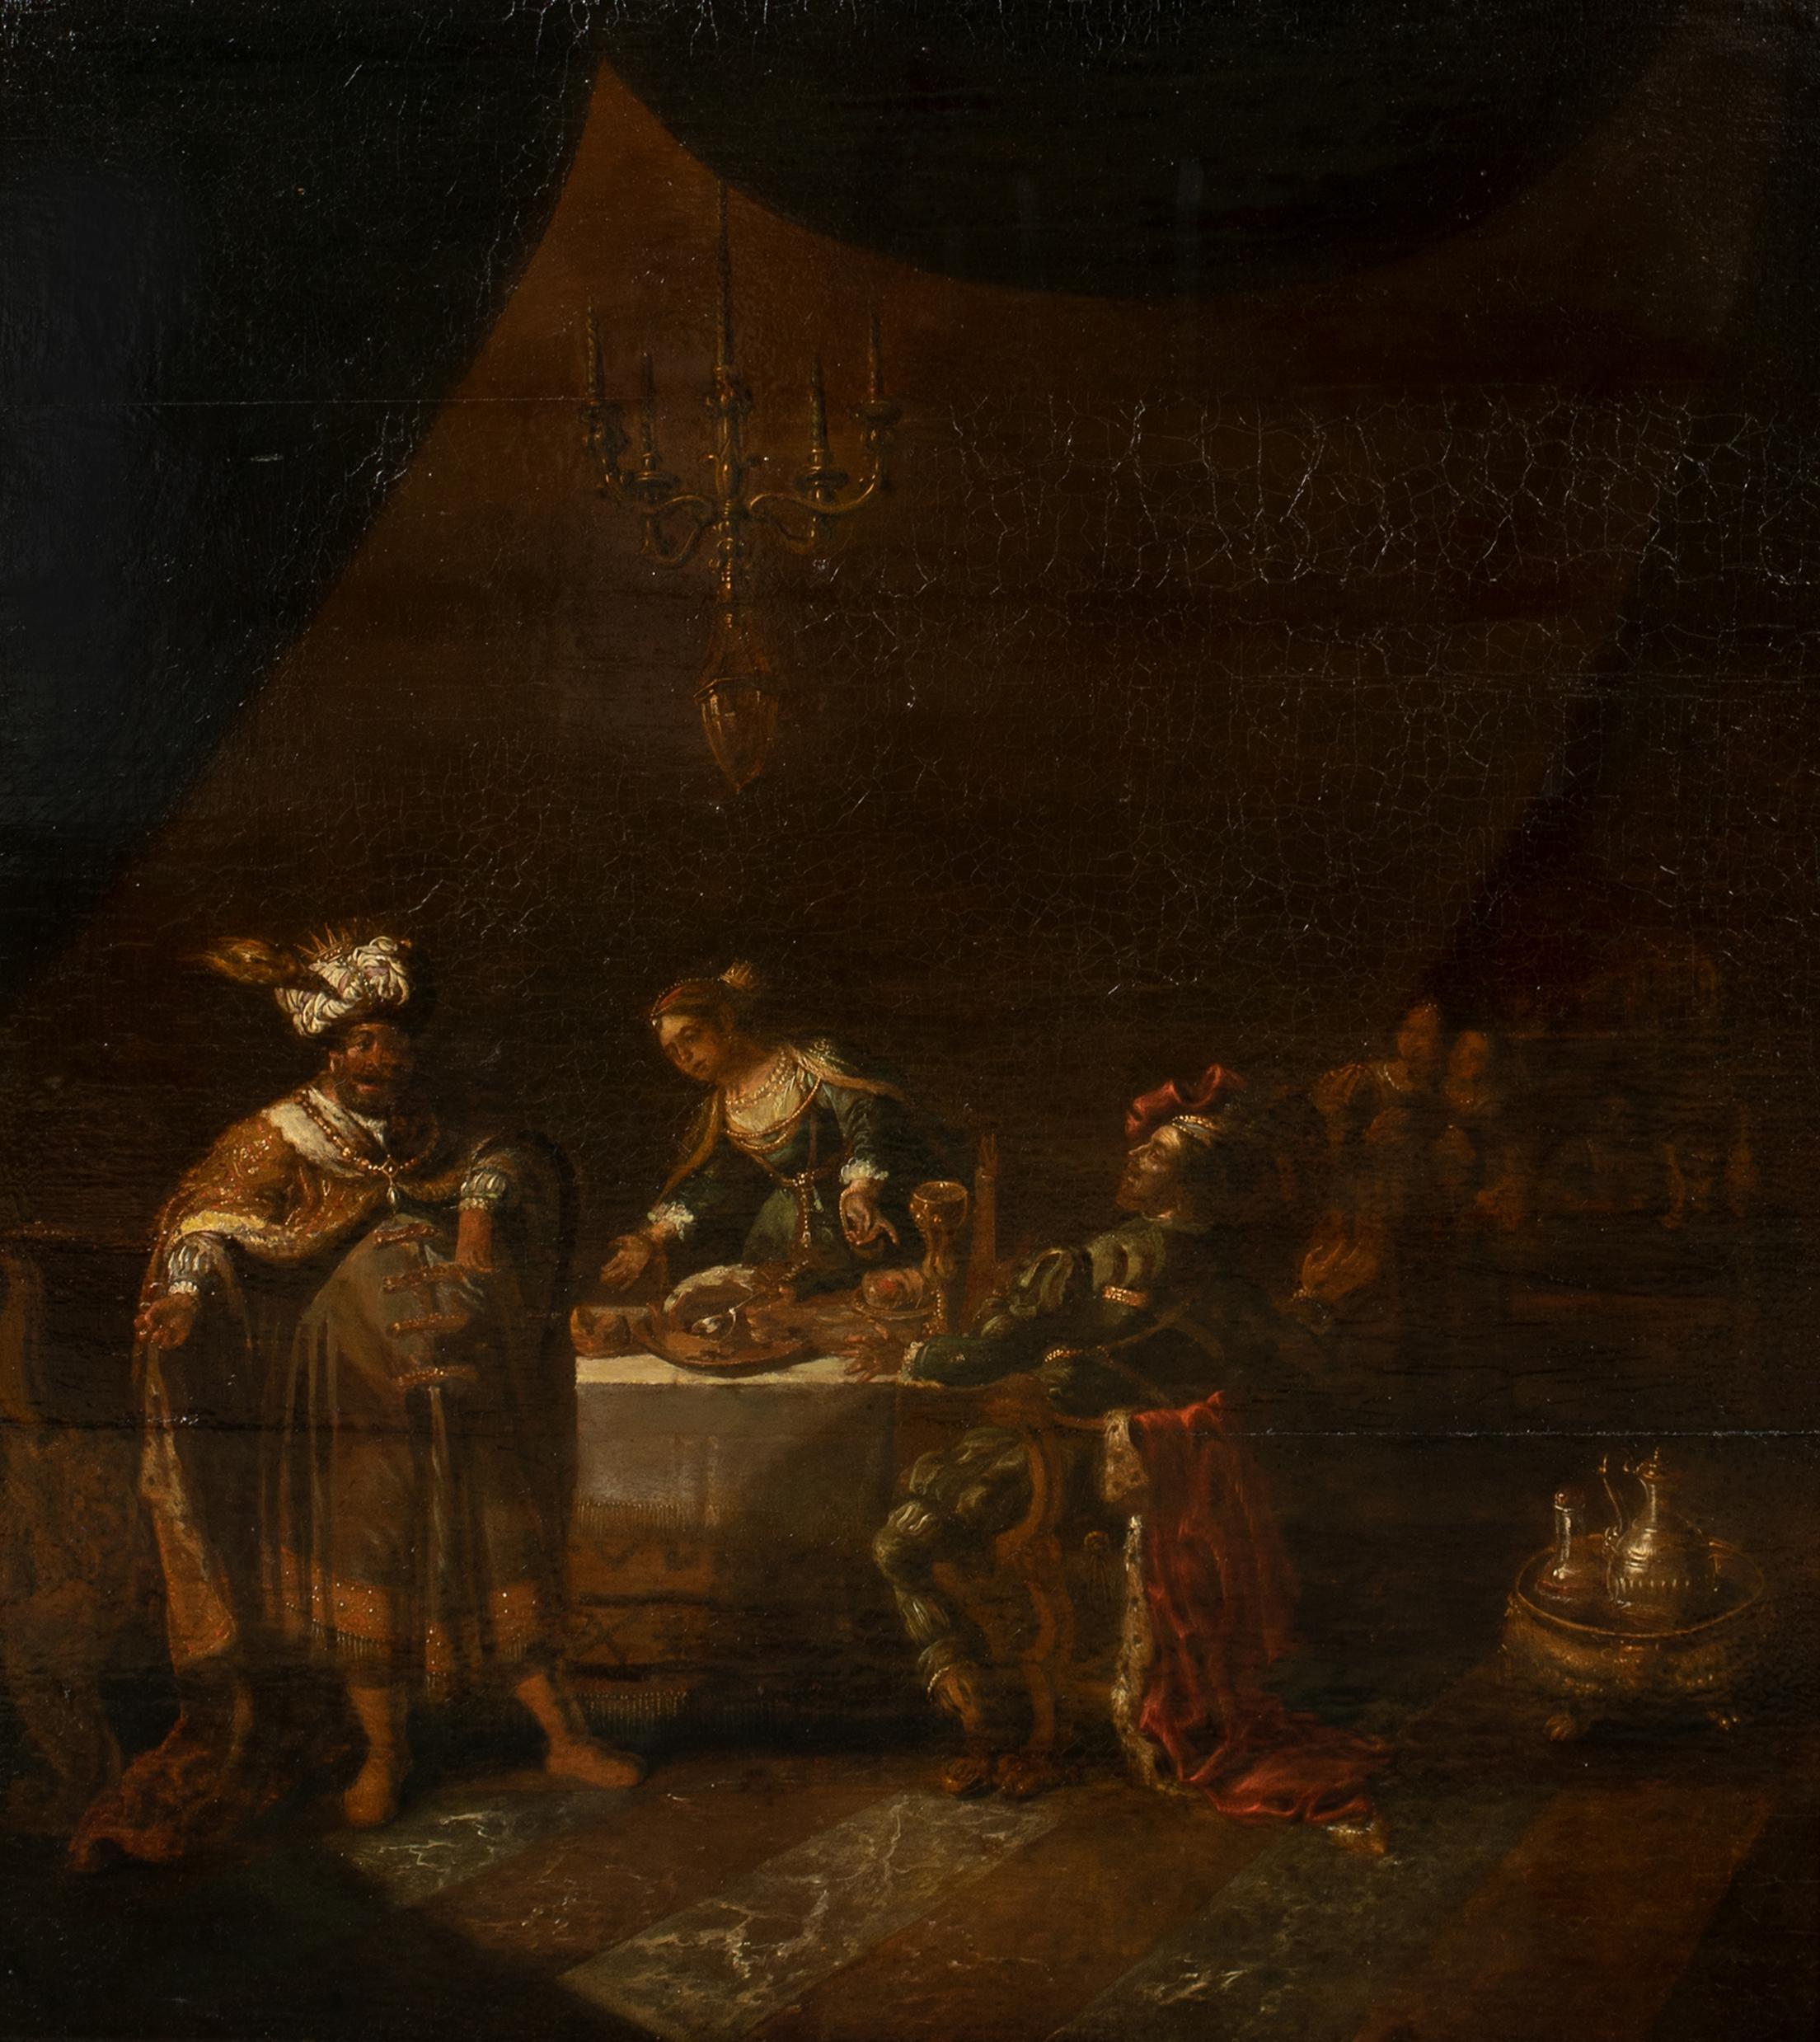 Rembrandt van Rijn Portrait Painting - Ahasuerus and Hamas at the Feast of Esther, 17th Century